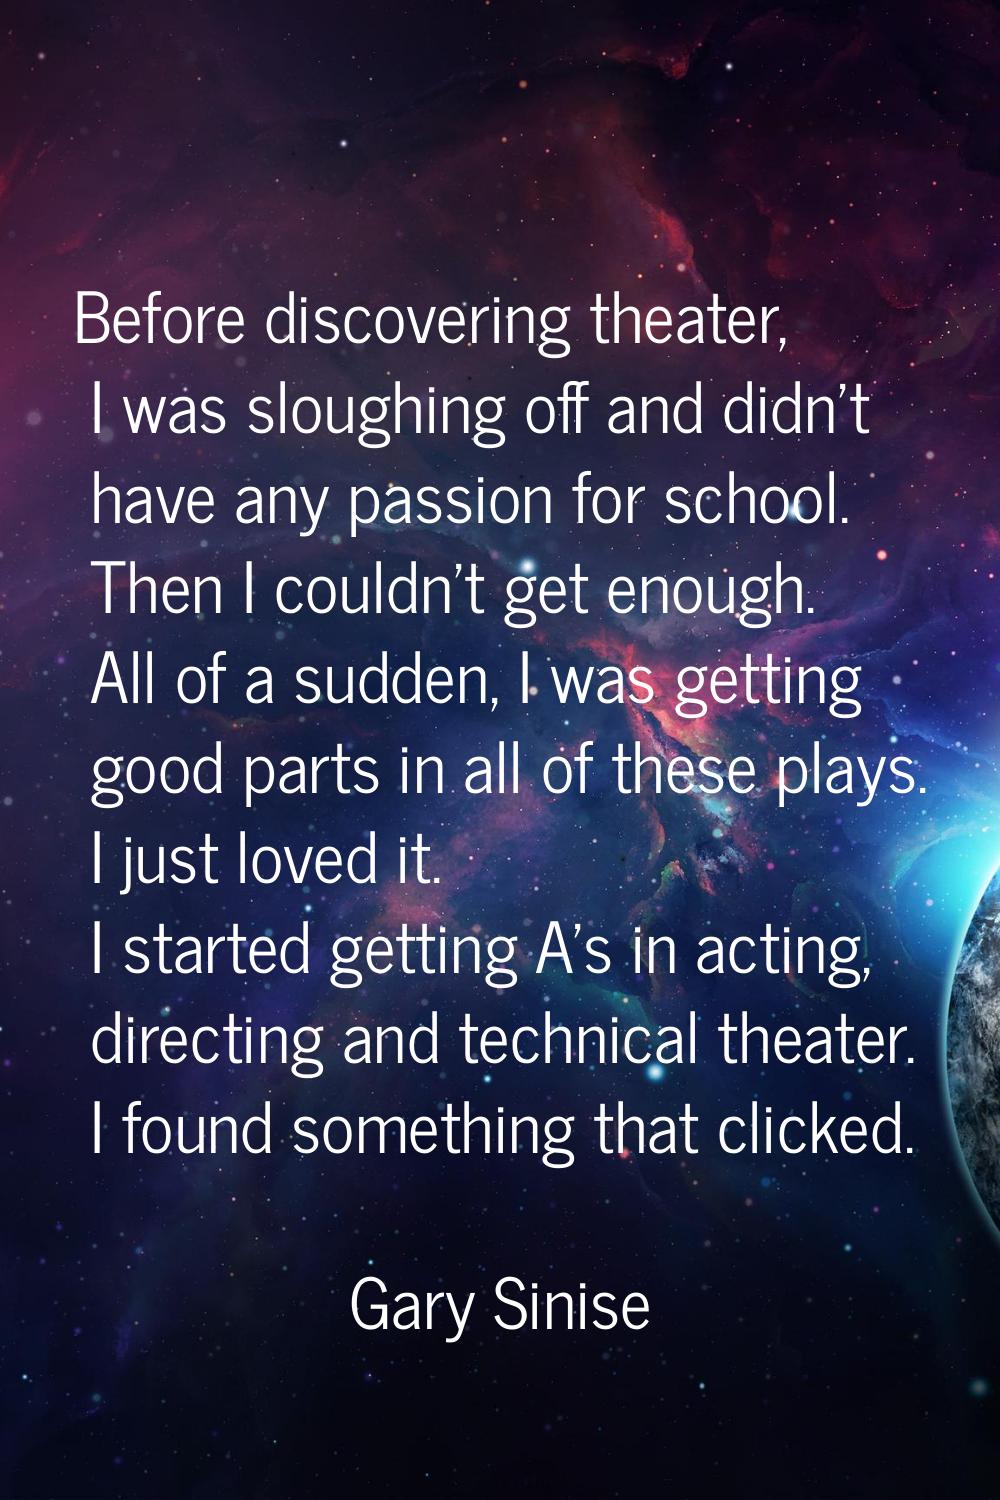 Before discovering theater, I was sloughing off and didn't have any passion for school. Then I coul